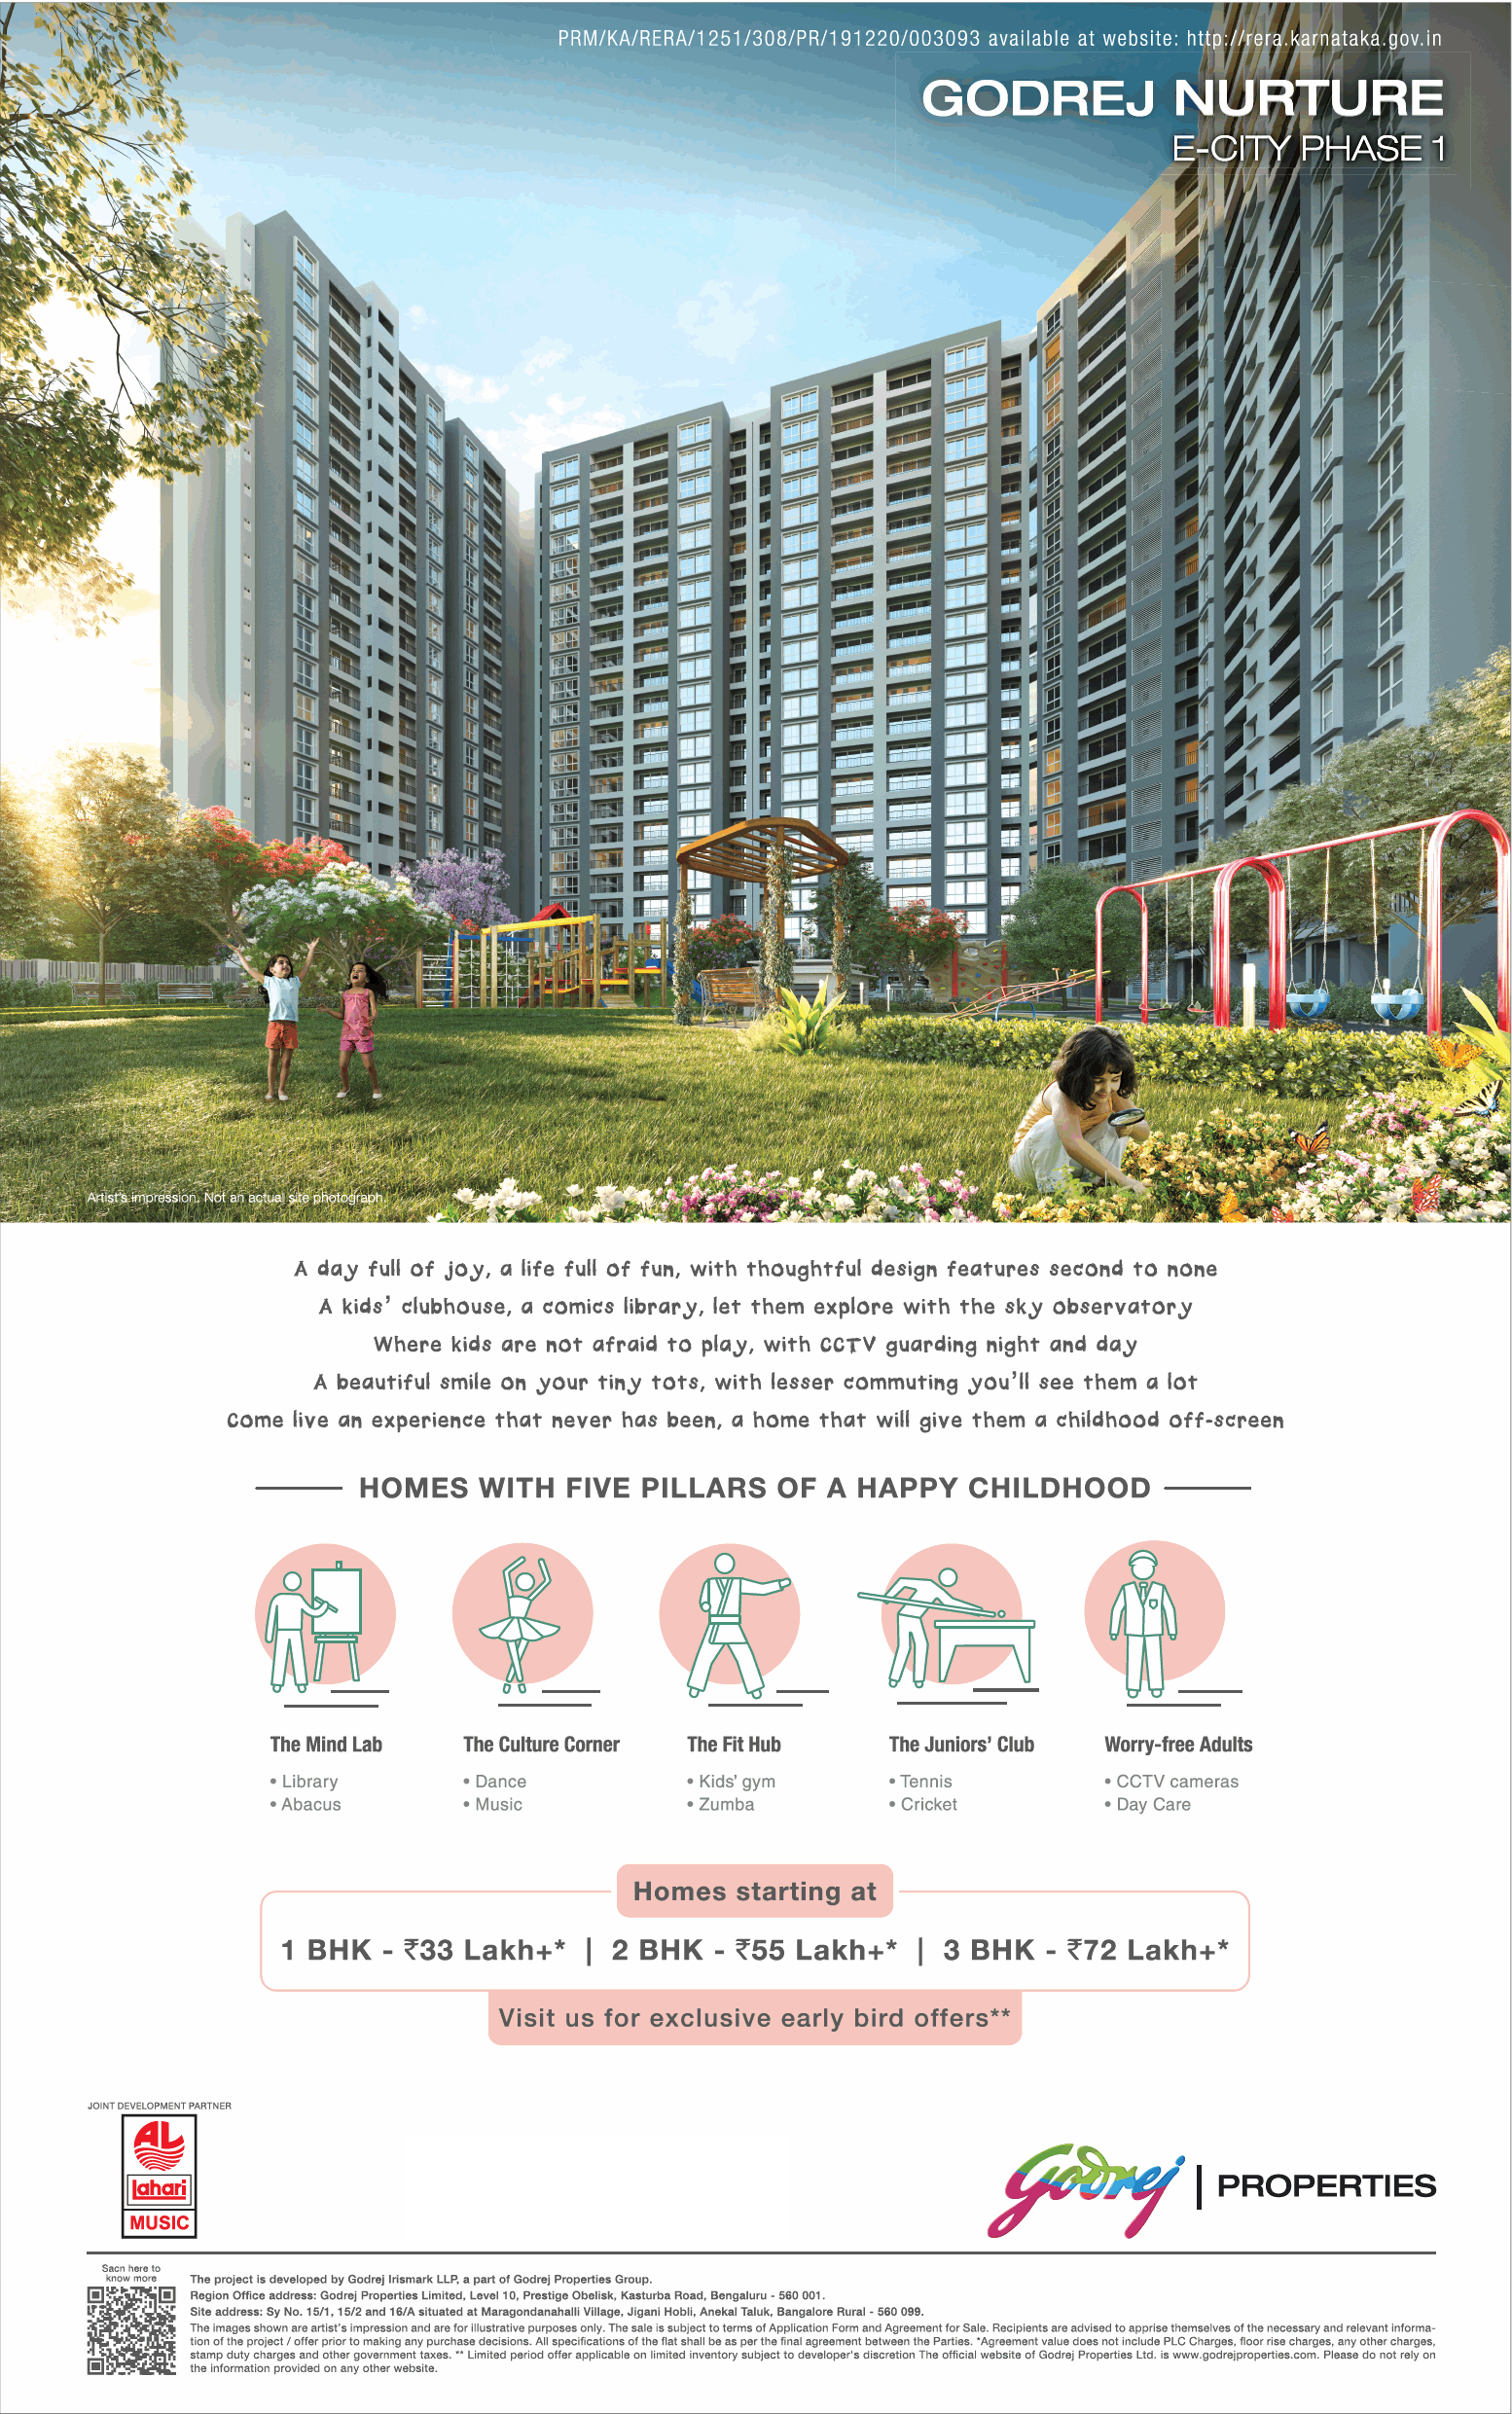 Book 1, 2 & 3 BHK Rs 33 Lac at Godrej Nurture in E-City Phase 1, Bangalore Update